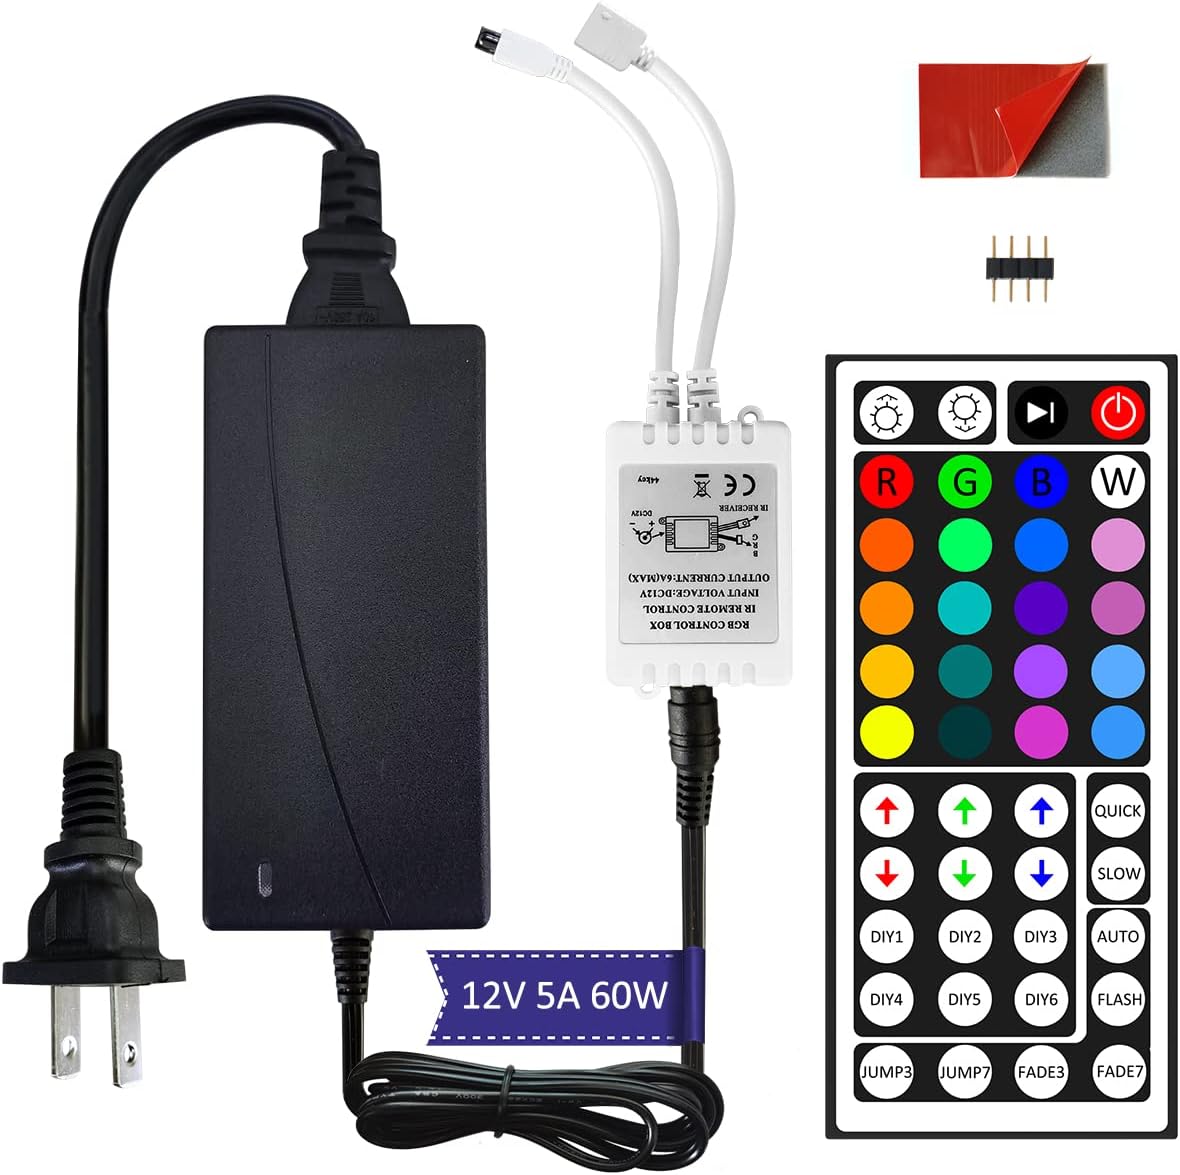 Clordeal 12V Power Supply, 44key Wireless IR Remote Control + RGB Control Box + 12V 5A LED Adapter for SMD 3528 5050 RGB Led Strip Lights (Not Compatiable with 24V LED Strip Lights)